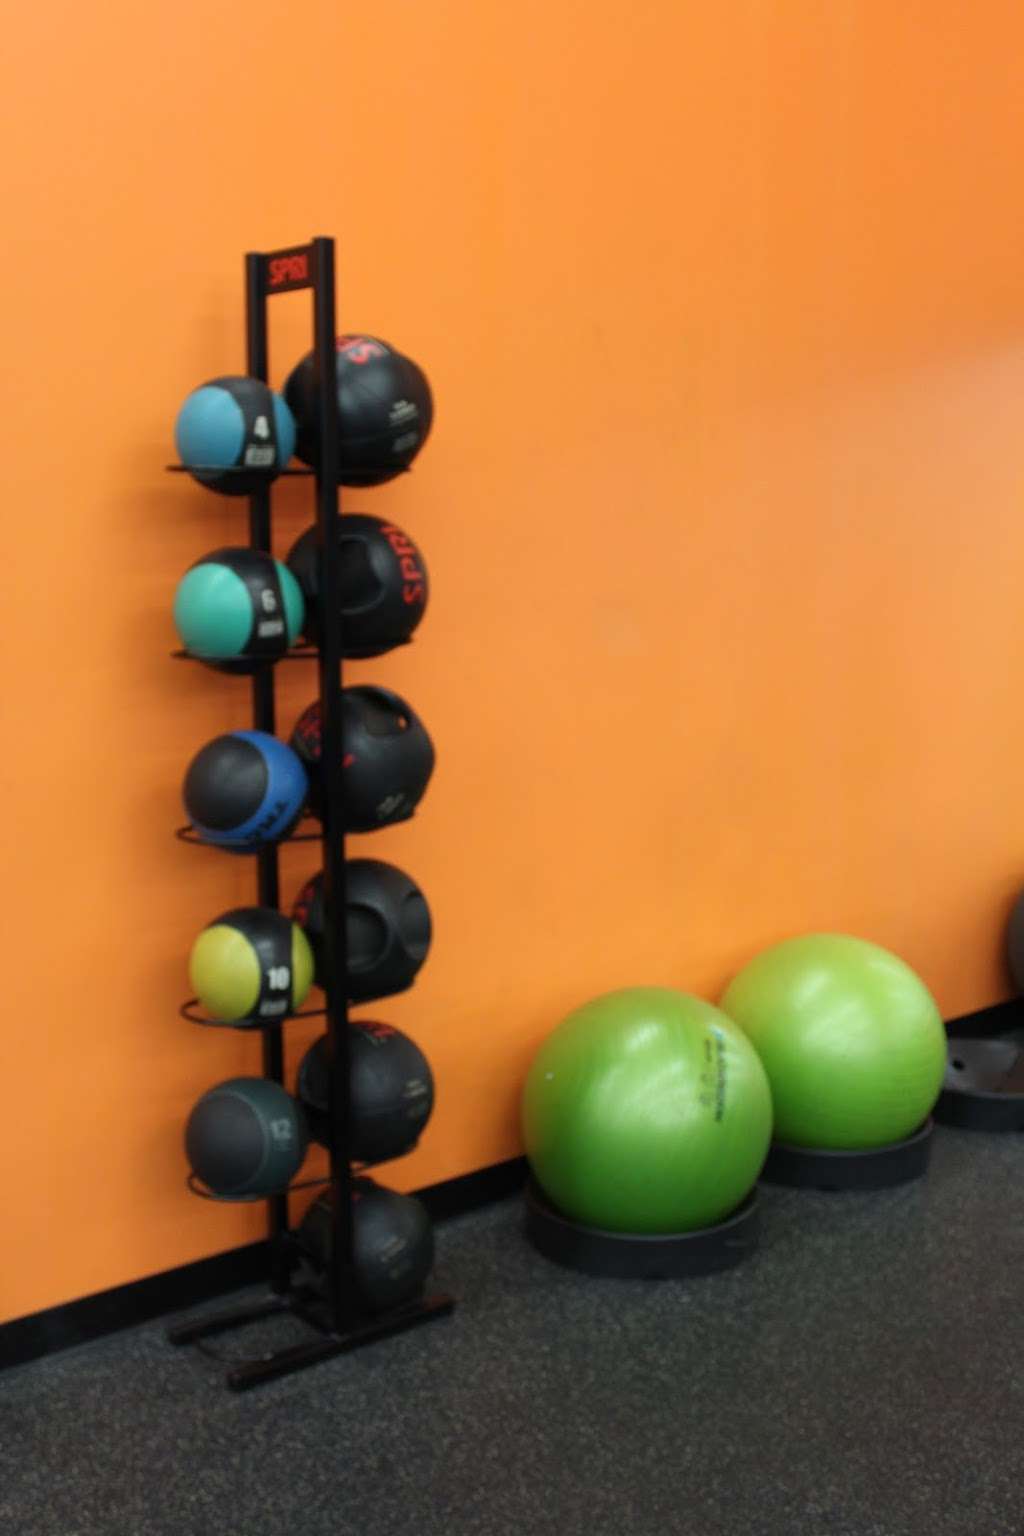 Charter Fitness of Orland Park | 66 Orland Square Dr, Orland Park, IL 60462 | Phone: (708) 364-0303